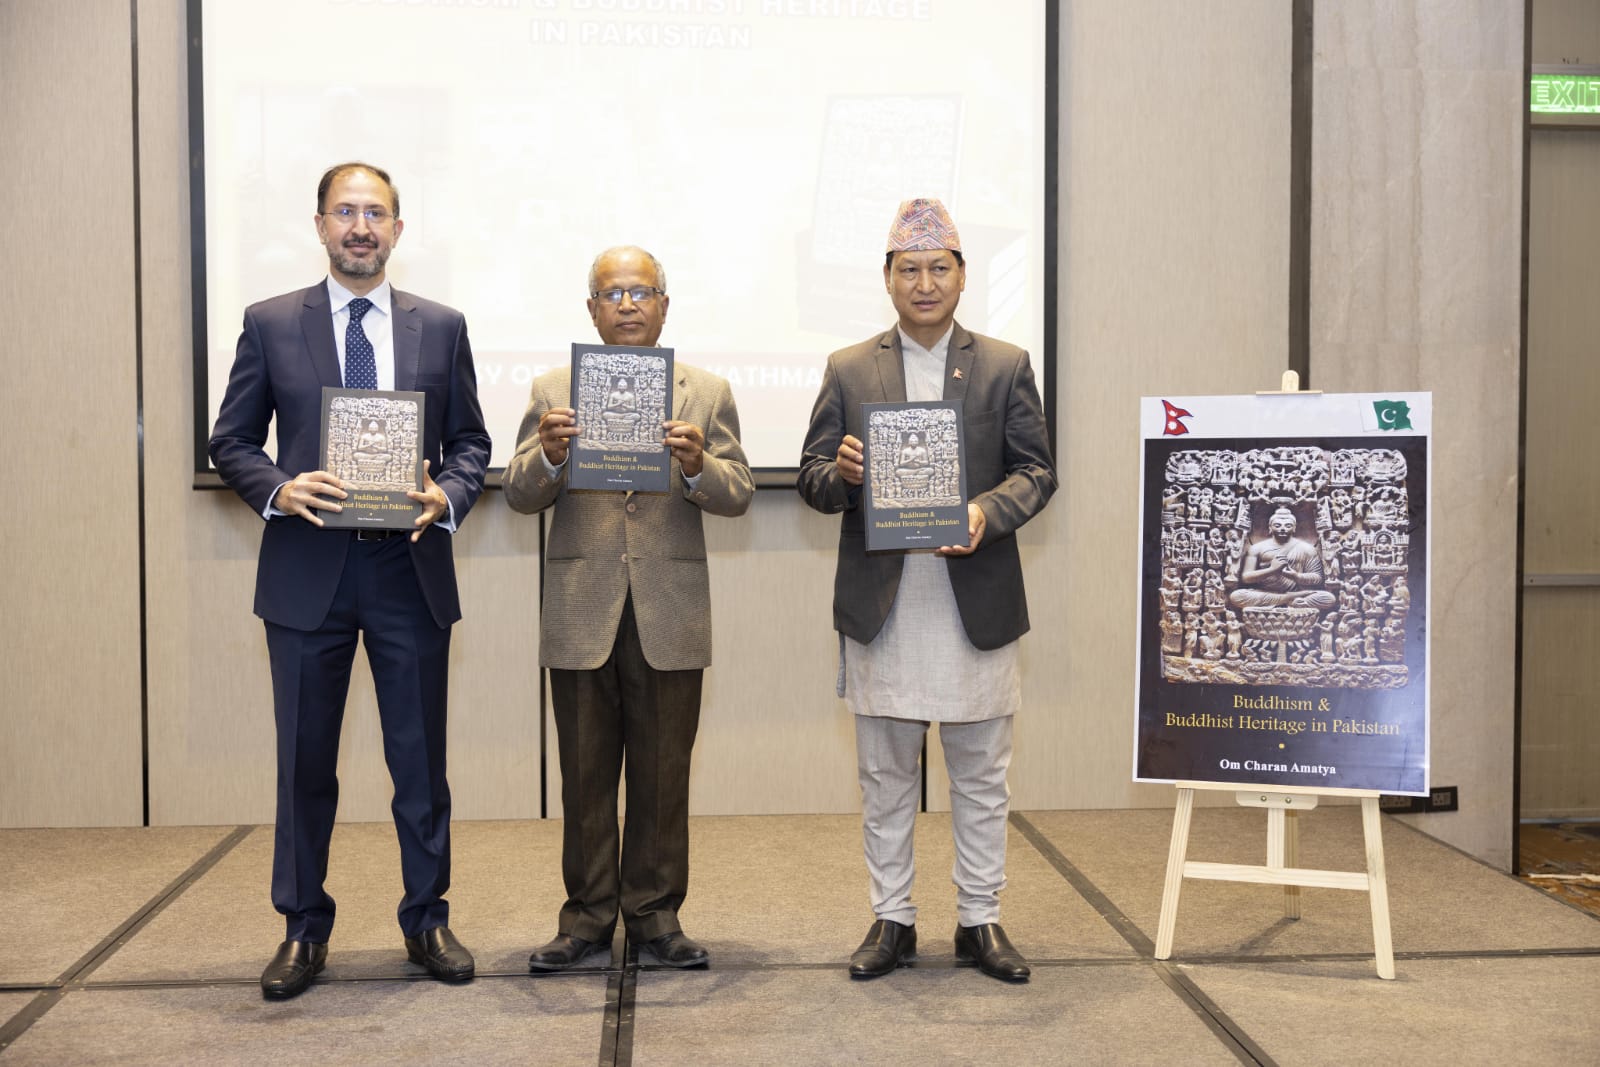 book-entitled-buddhism-and-buddhist-heritage-in-pakistan-launched